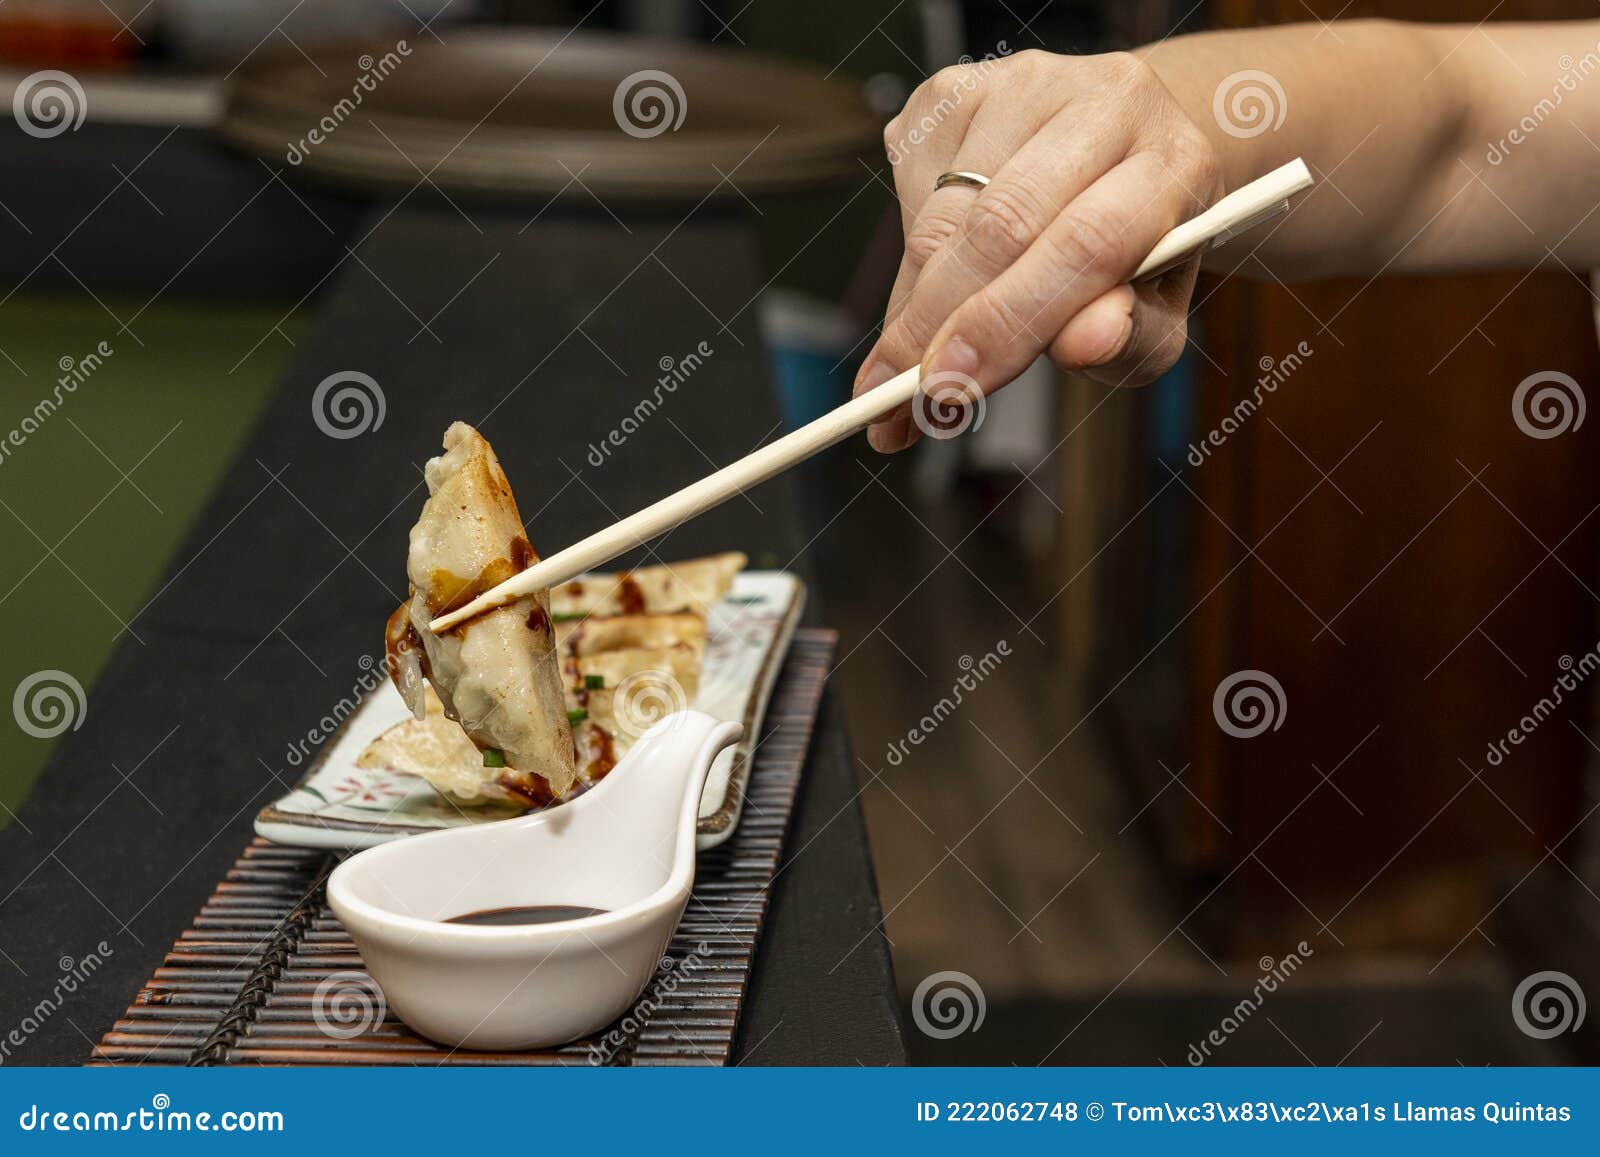 woman's hand with chopsticks dipping a gyoza in soy sauce and then gobbling it up with delight